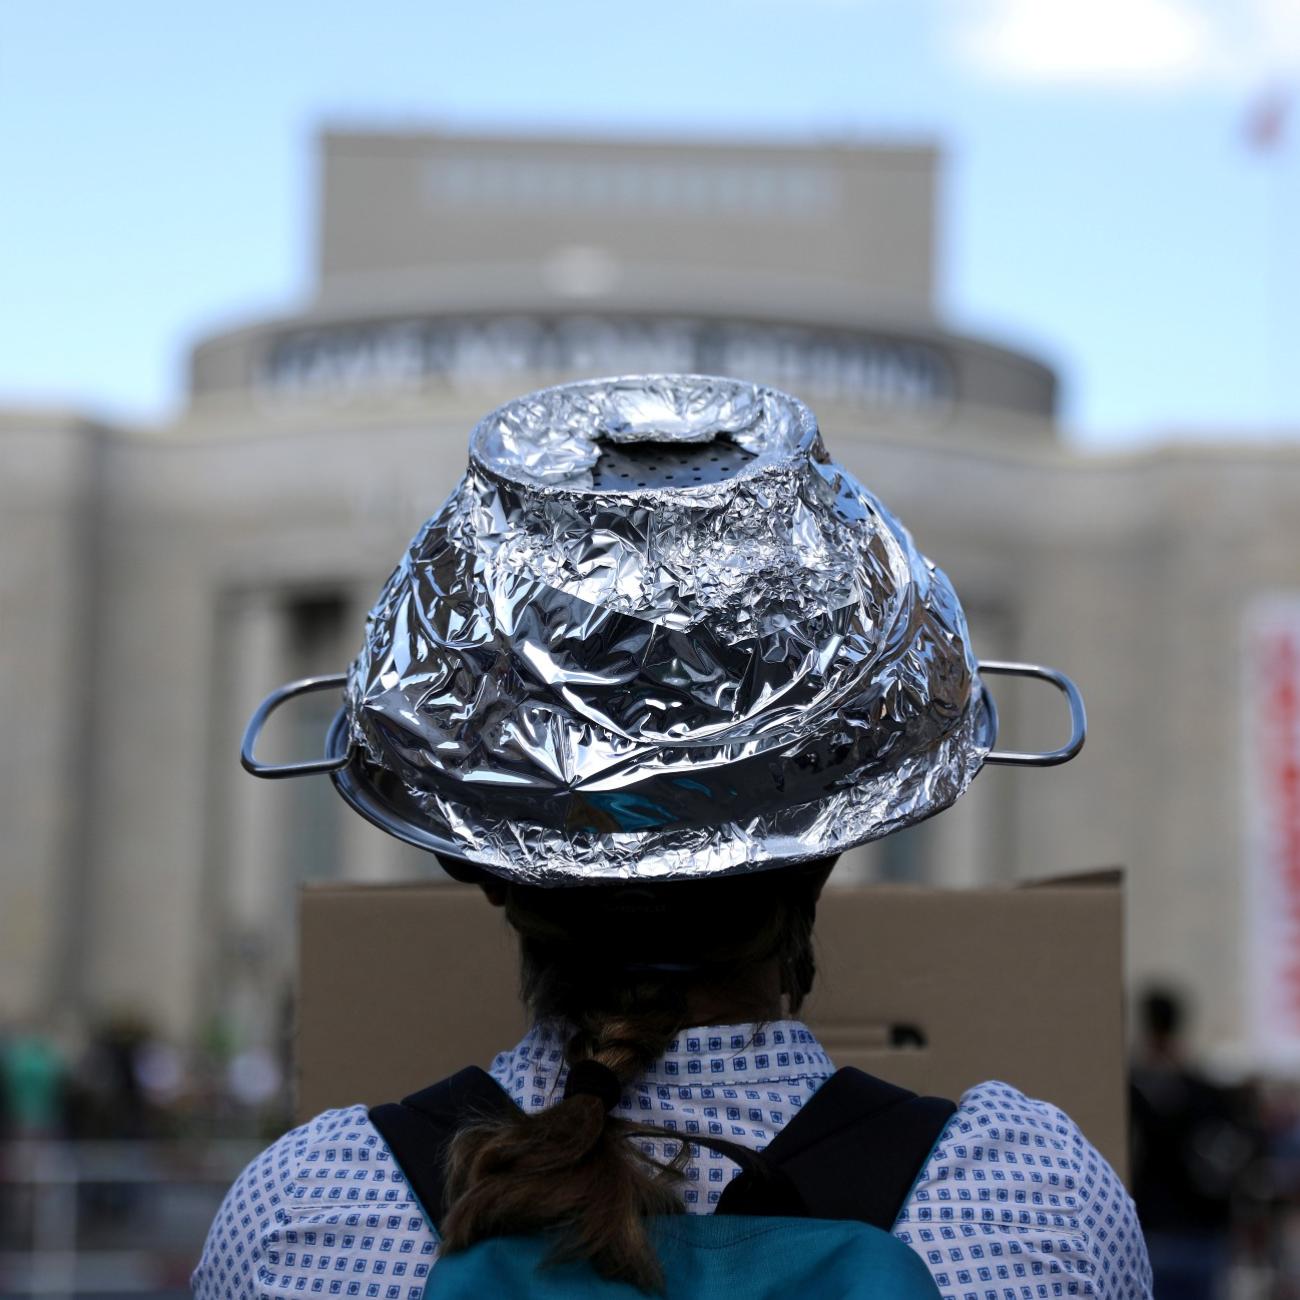 A woman attends a protest of conspiracy theorists and other demonstrators at Rosa Luxemburg Platz, amid the spread of COVID-19, in Berlin, Germany, on May 9, 2020.